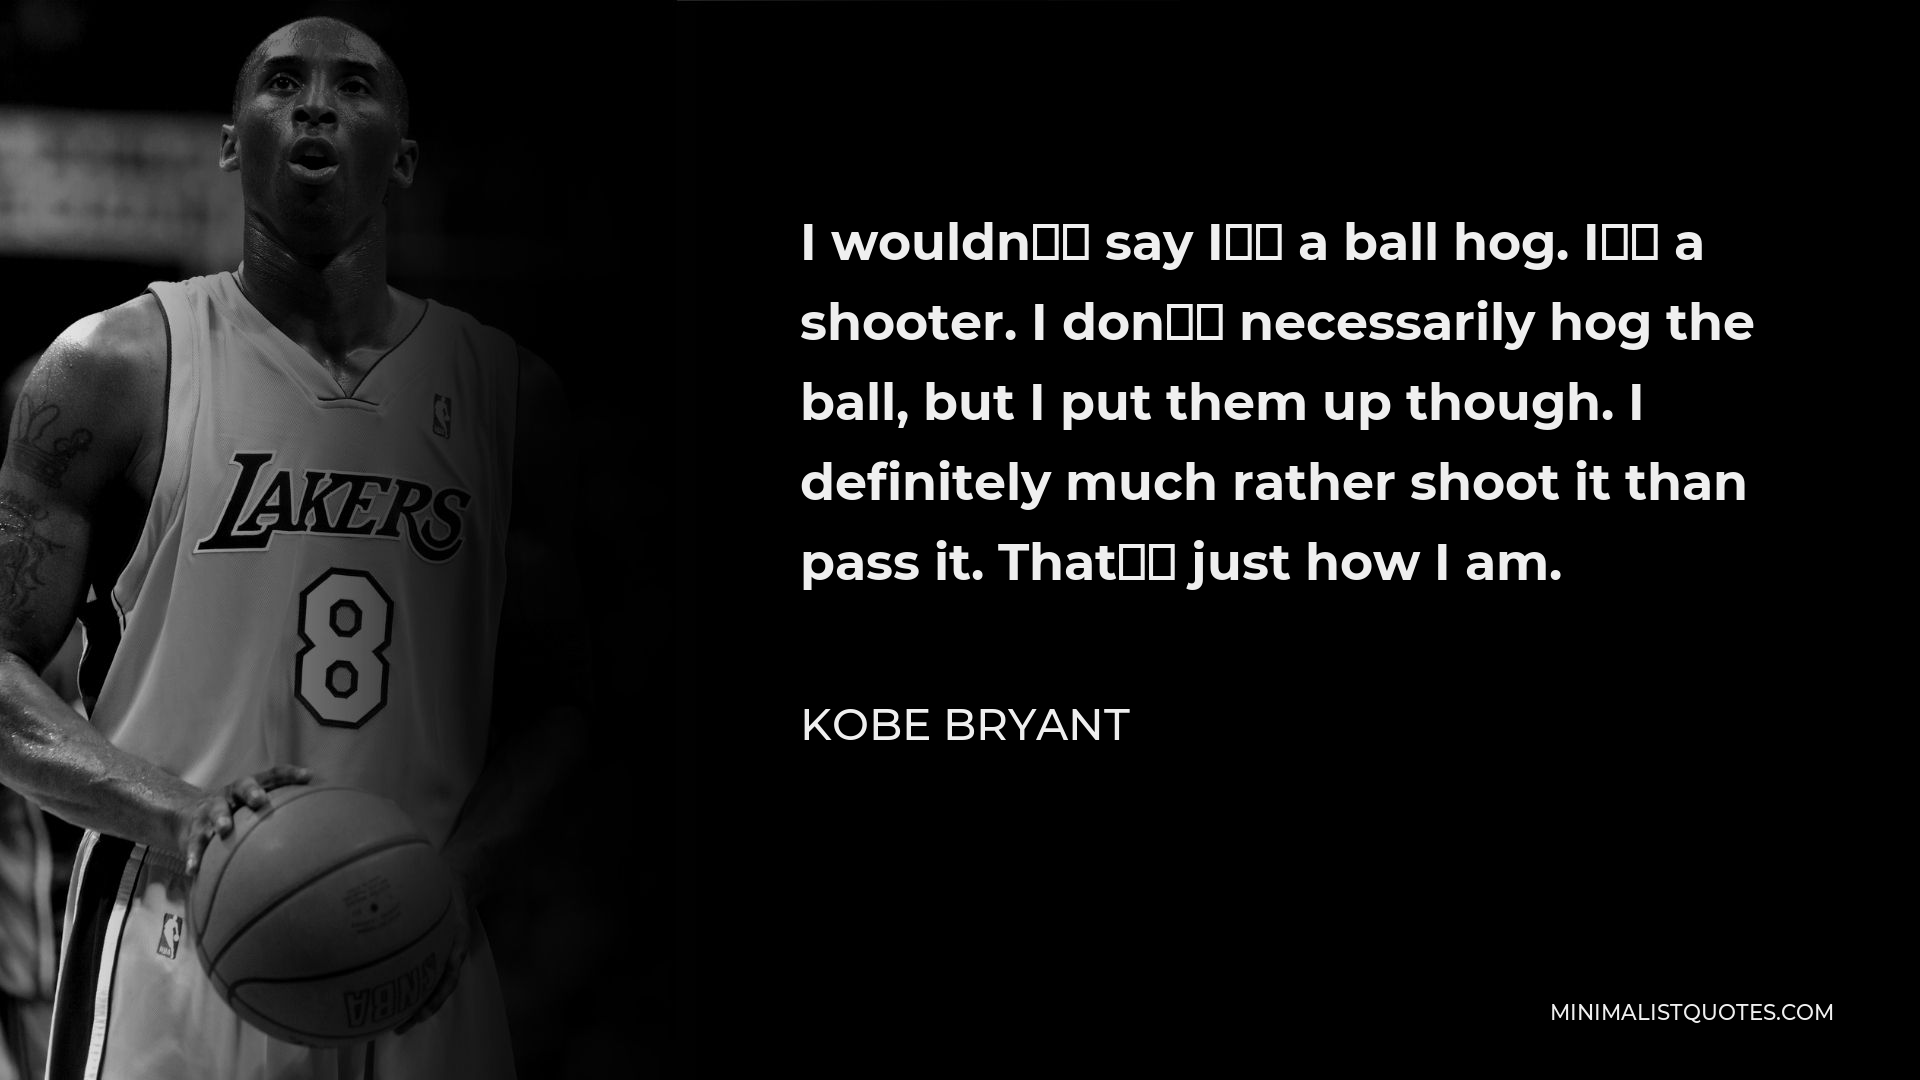 Kobe Bryant Quote - I wouldn’t say I’m a ball hog. I’m a shooter. I don’t necessarily hog the ball, but I put them up though. I definitely much rather shoot it than pass it. That’s just how I am.